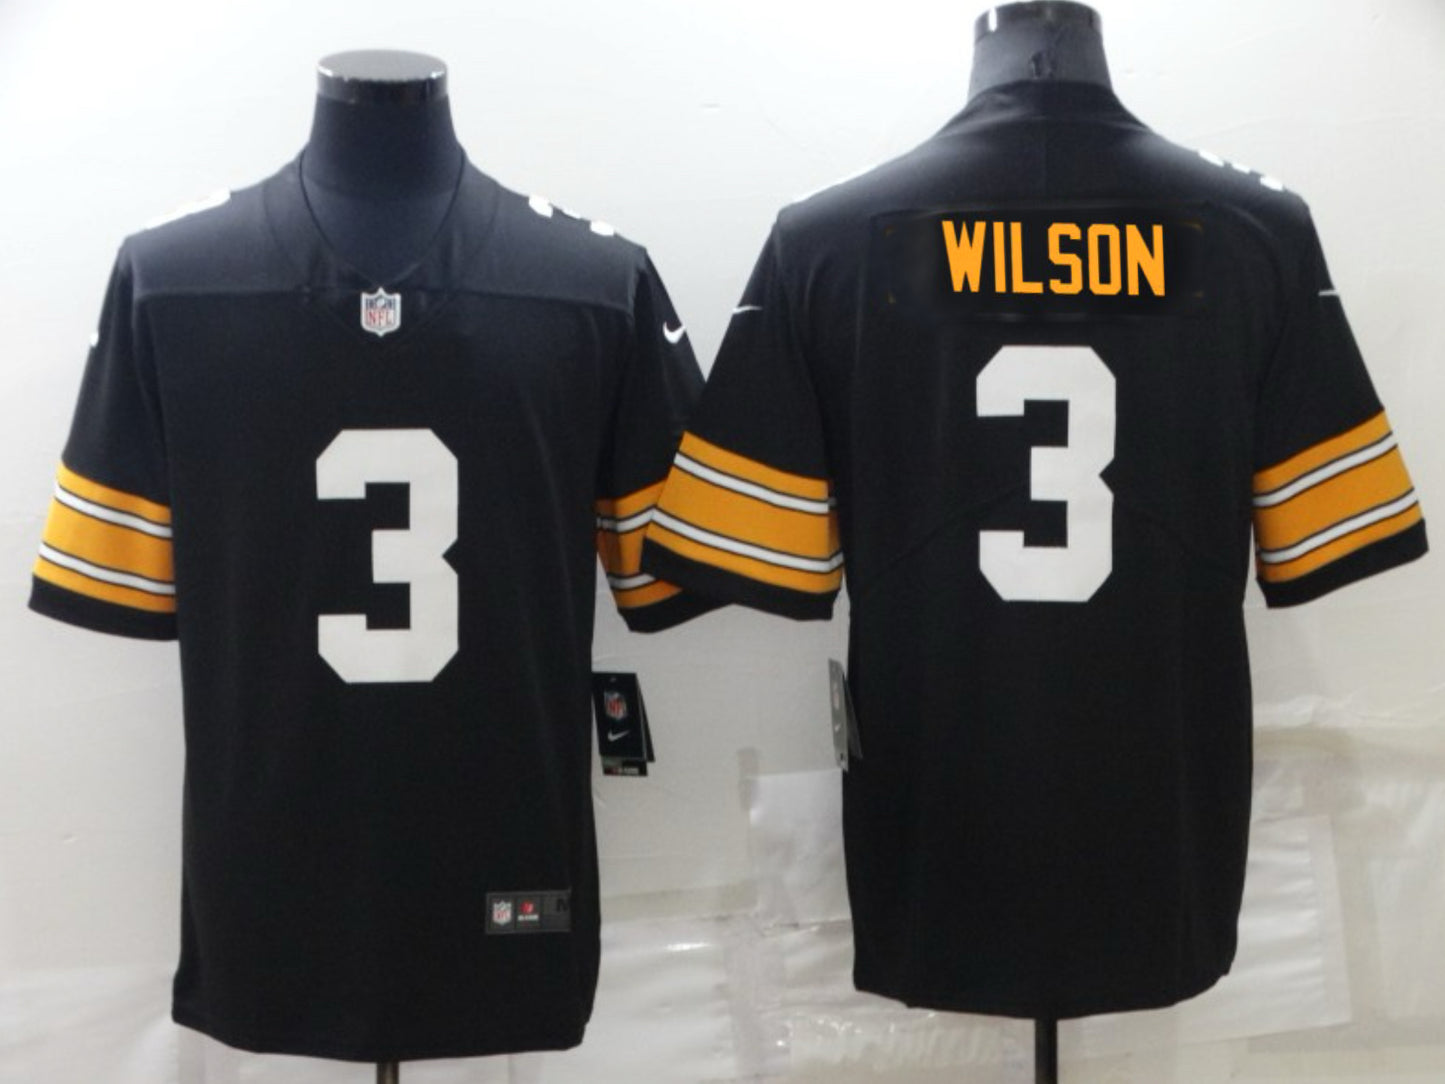 Russell Wilson Pittsburgh Steelers 2024/25 NFL Throwback Classic Nike Vapor Limited Jersey - Black